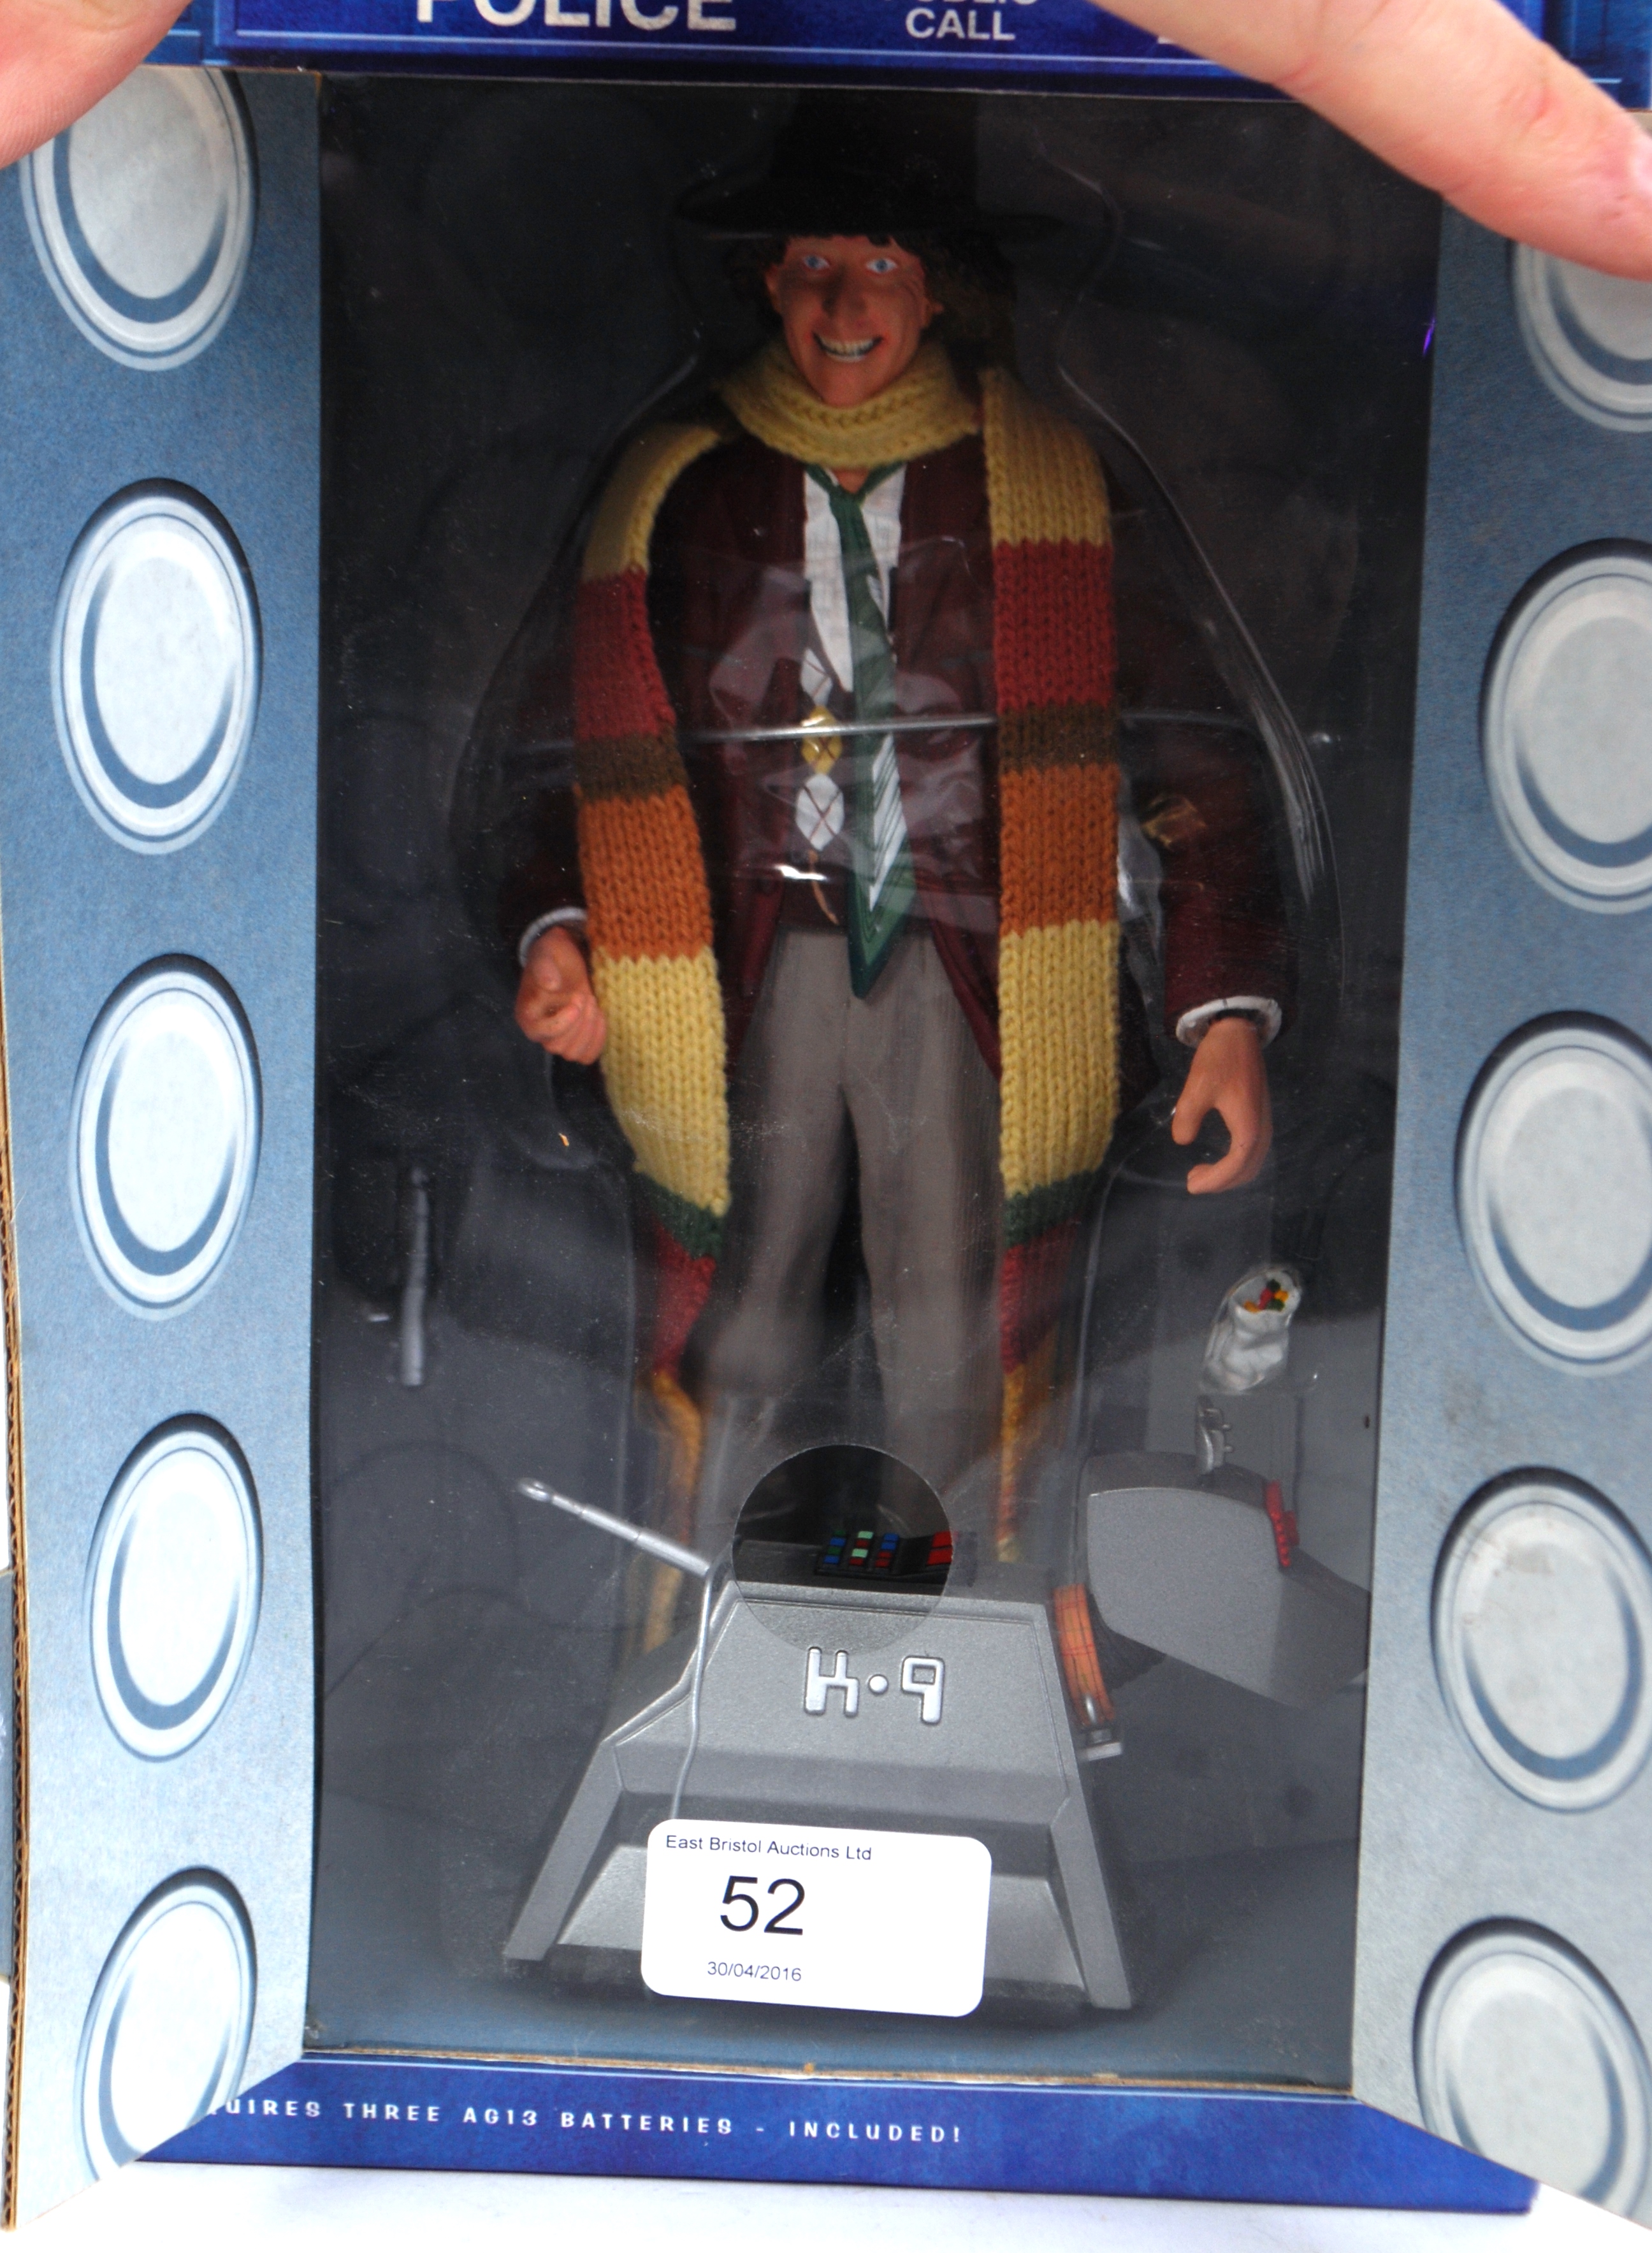 DOCTOR WHO: An original Product Enterprise ' Talking Dr Who with Talking K-9 ' action figure set. - Image 3 of 3